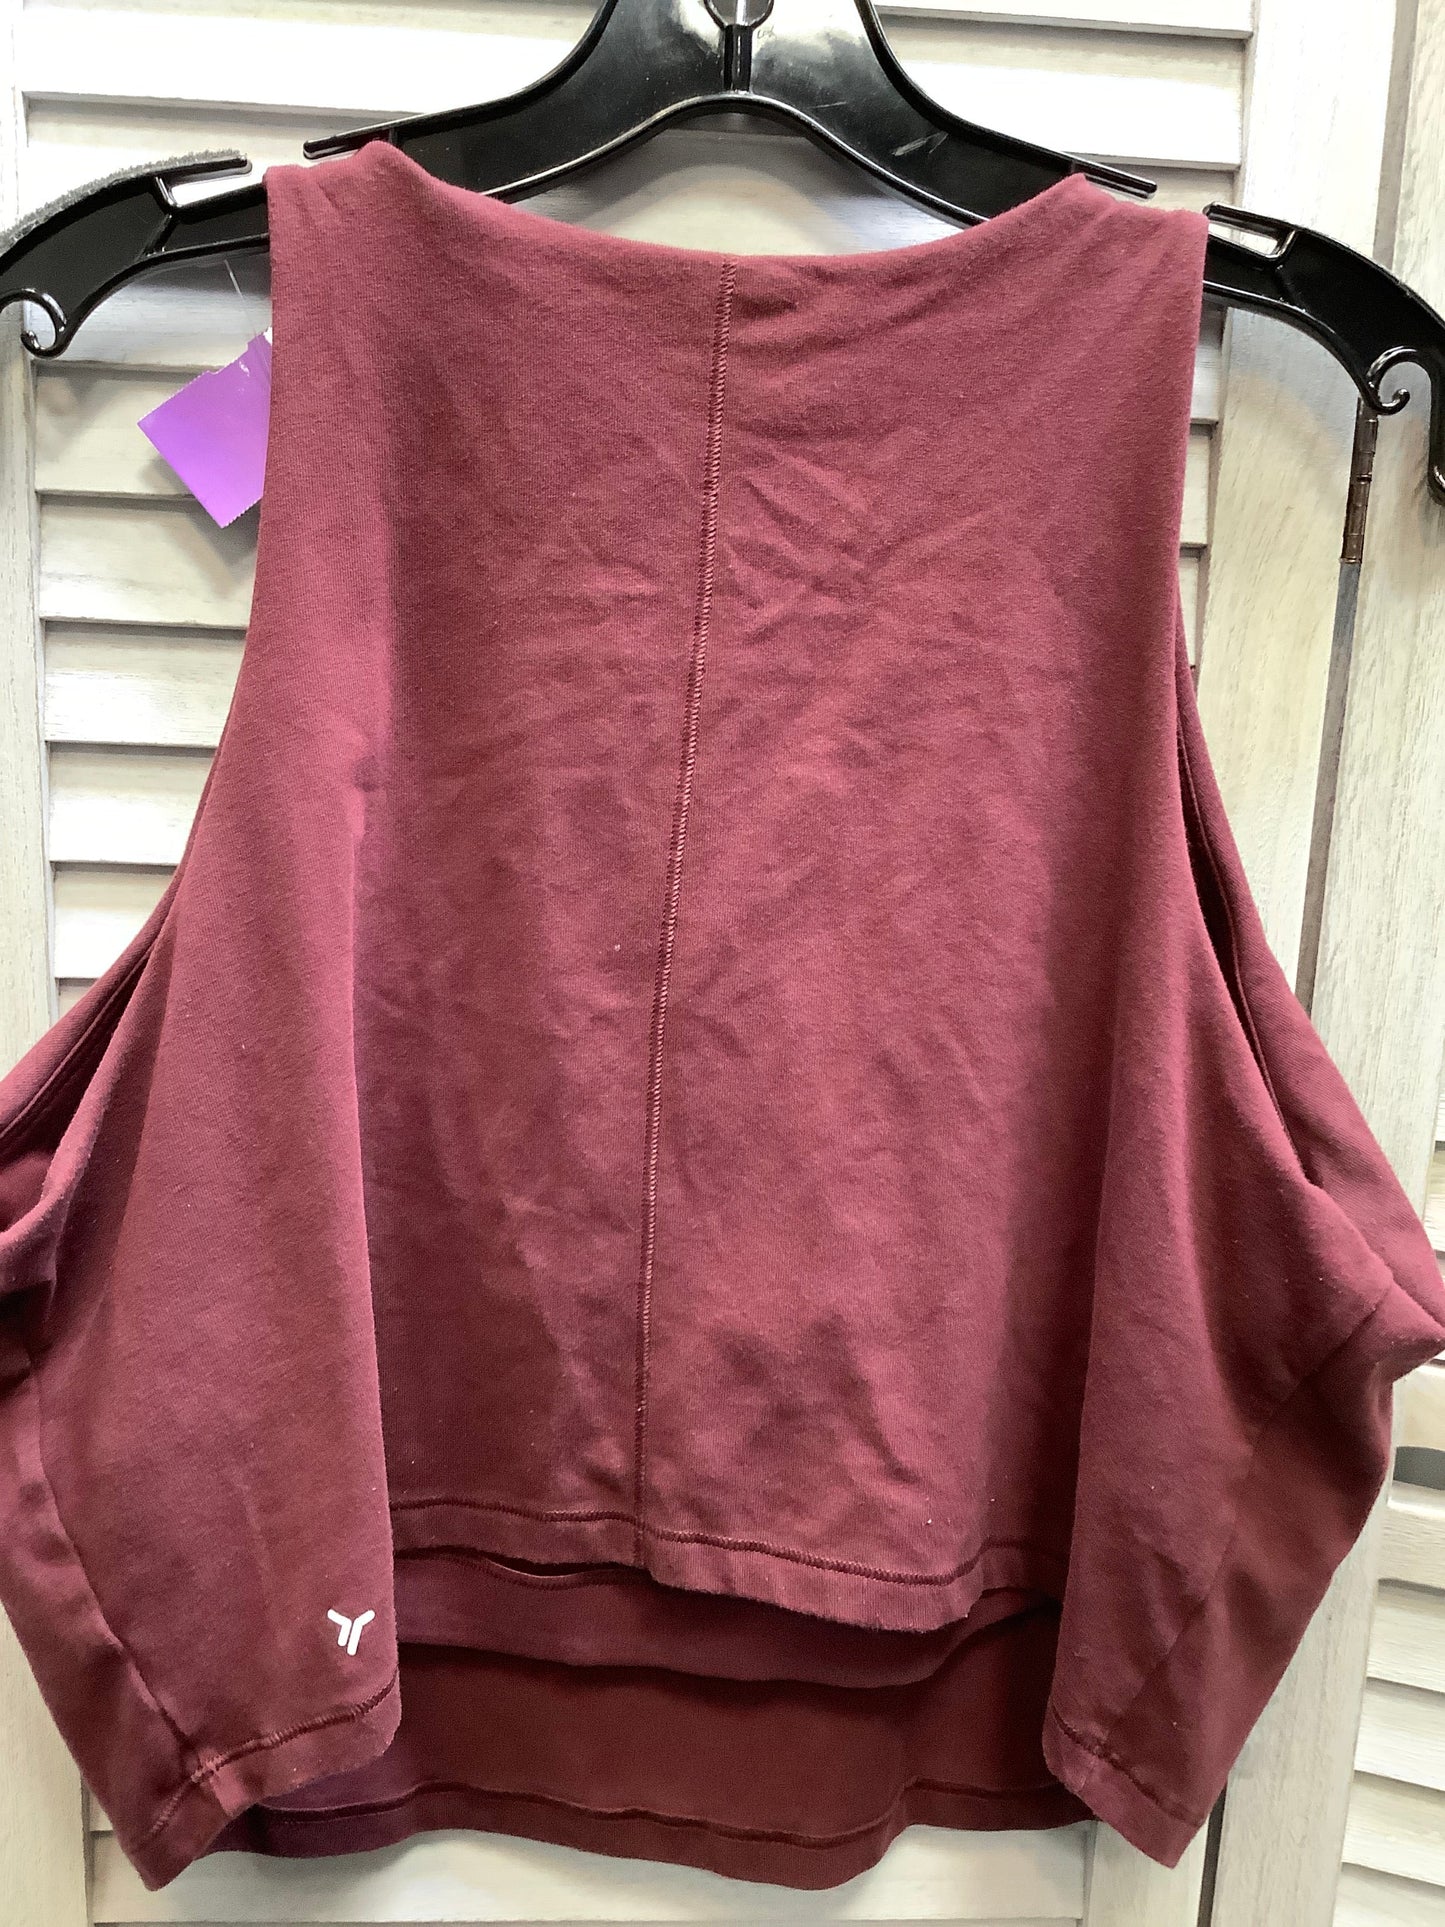 Rose Gold Athletic Tank Top Old Navy, Size 2x